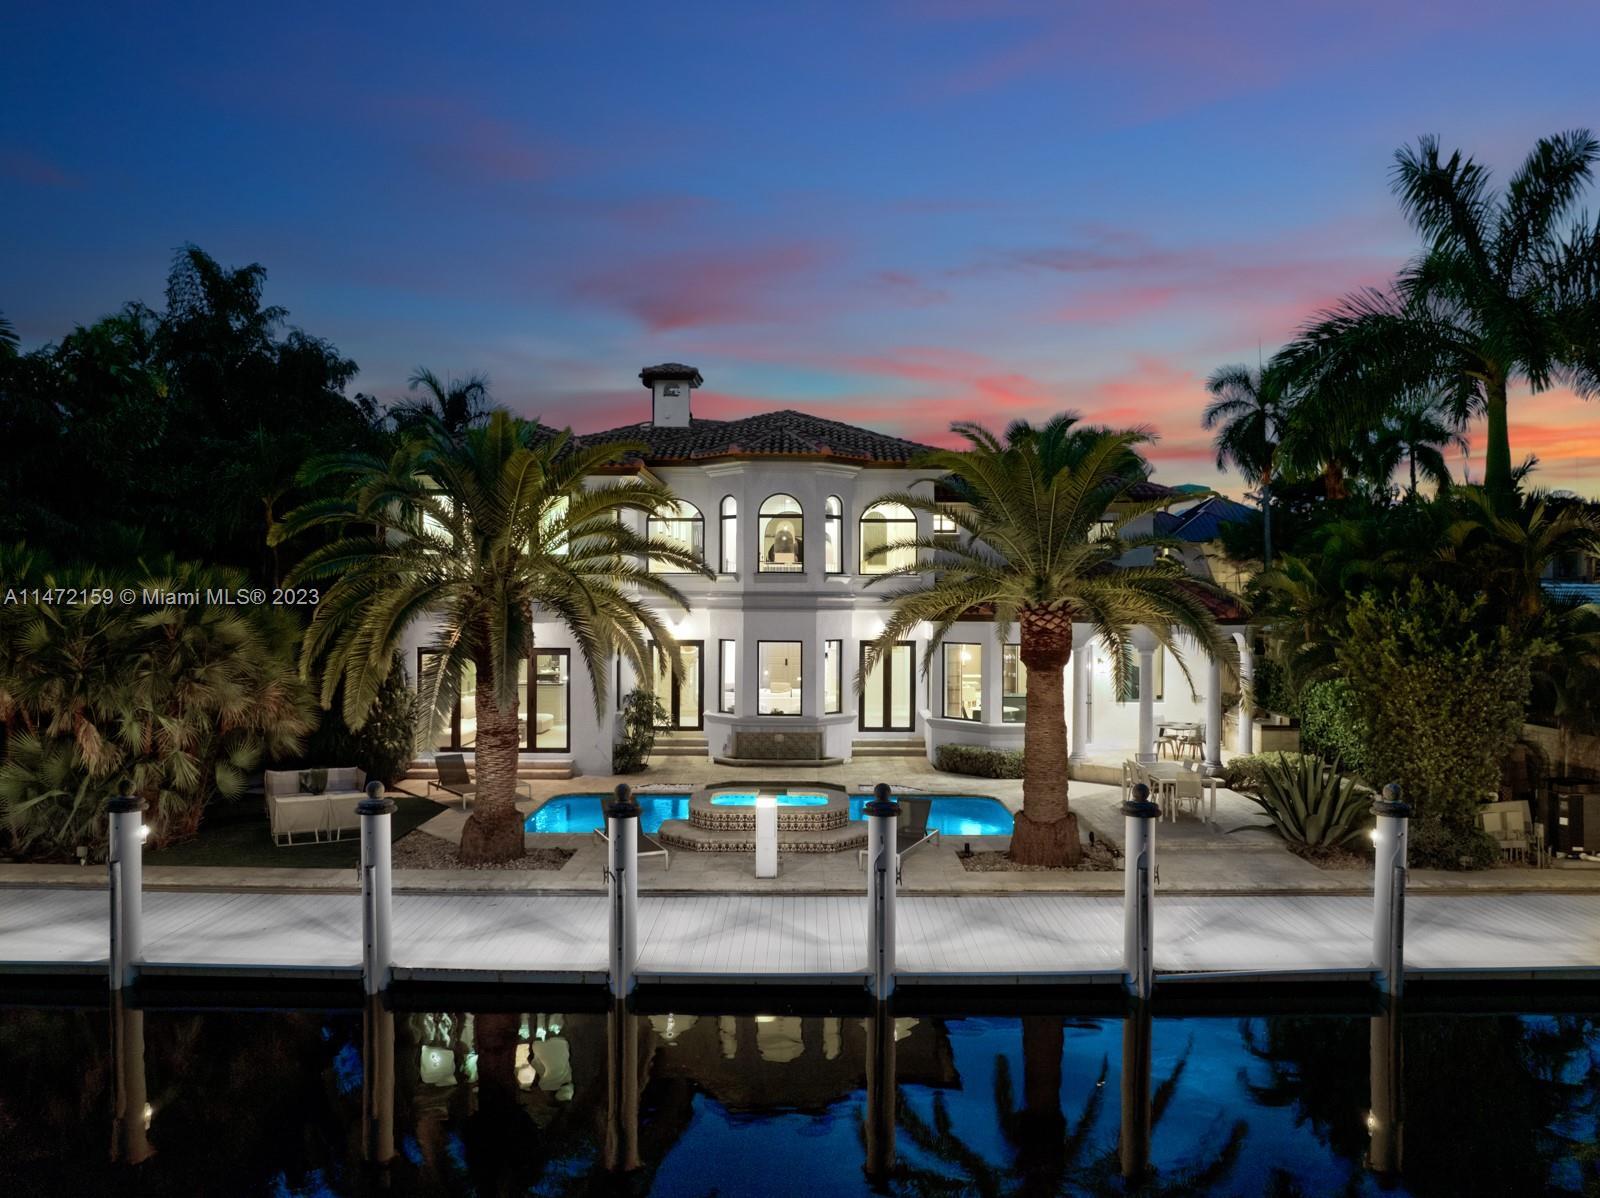 Completely renovated Luxurious waterfront mansion in Nurmi Isles. This private estate features a tot